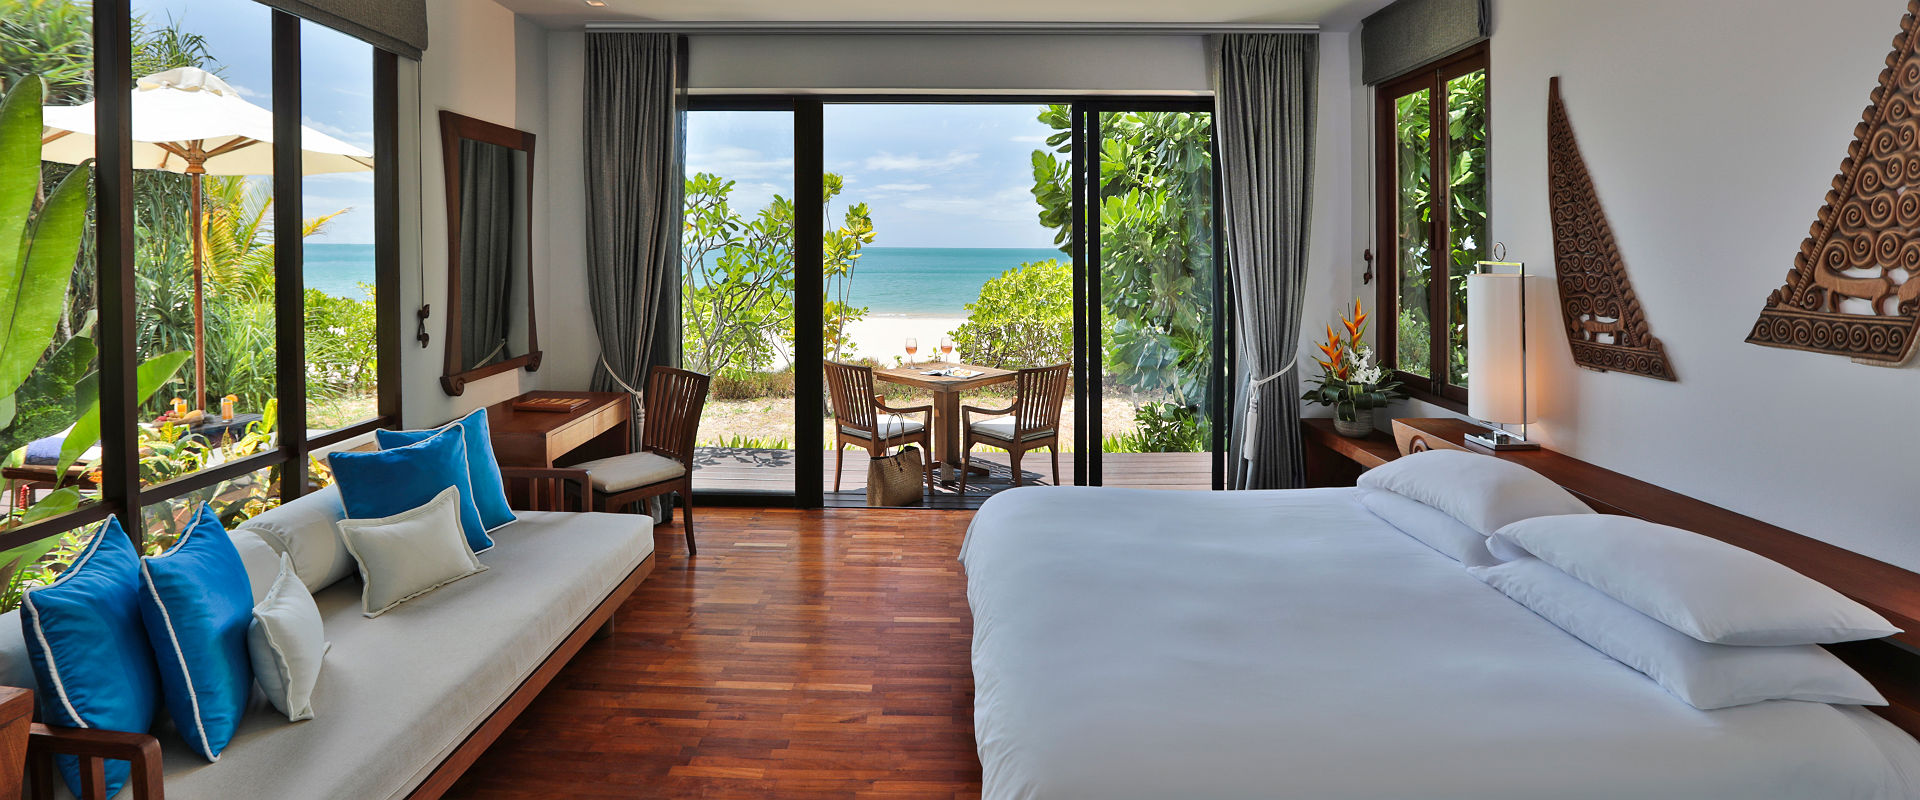 Pimalai Resort and Spa -beachside pavilion suite two bedroom - chambre